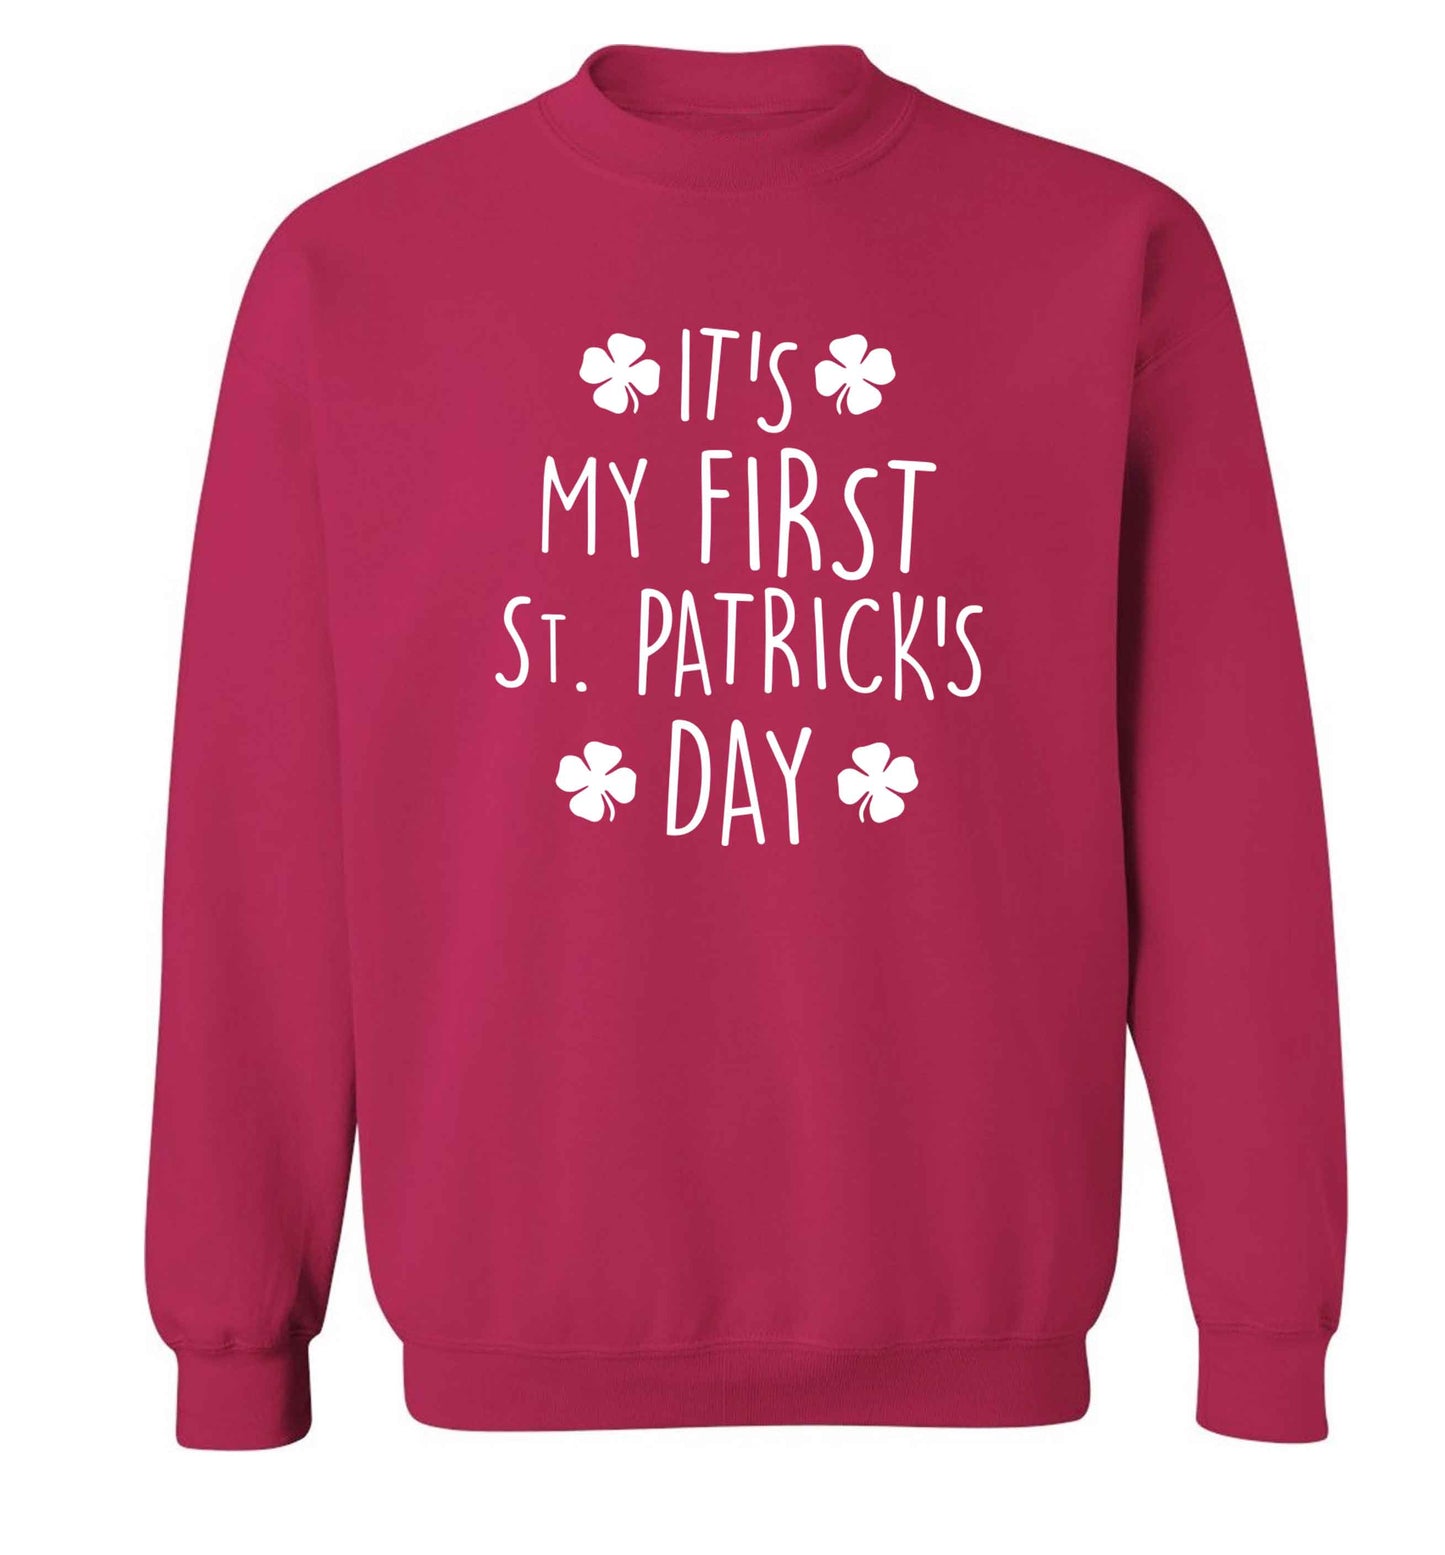 It's my first St.Patrick's day adult's unisex pink sweater 2XL